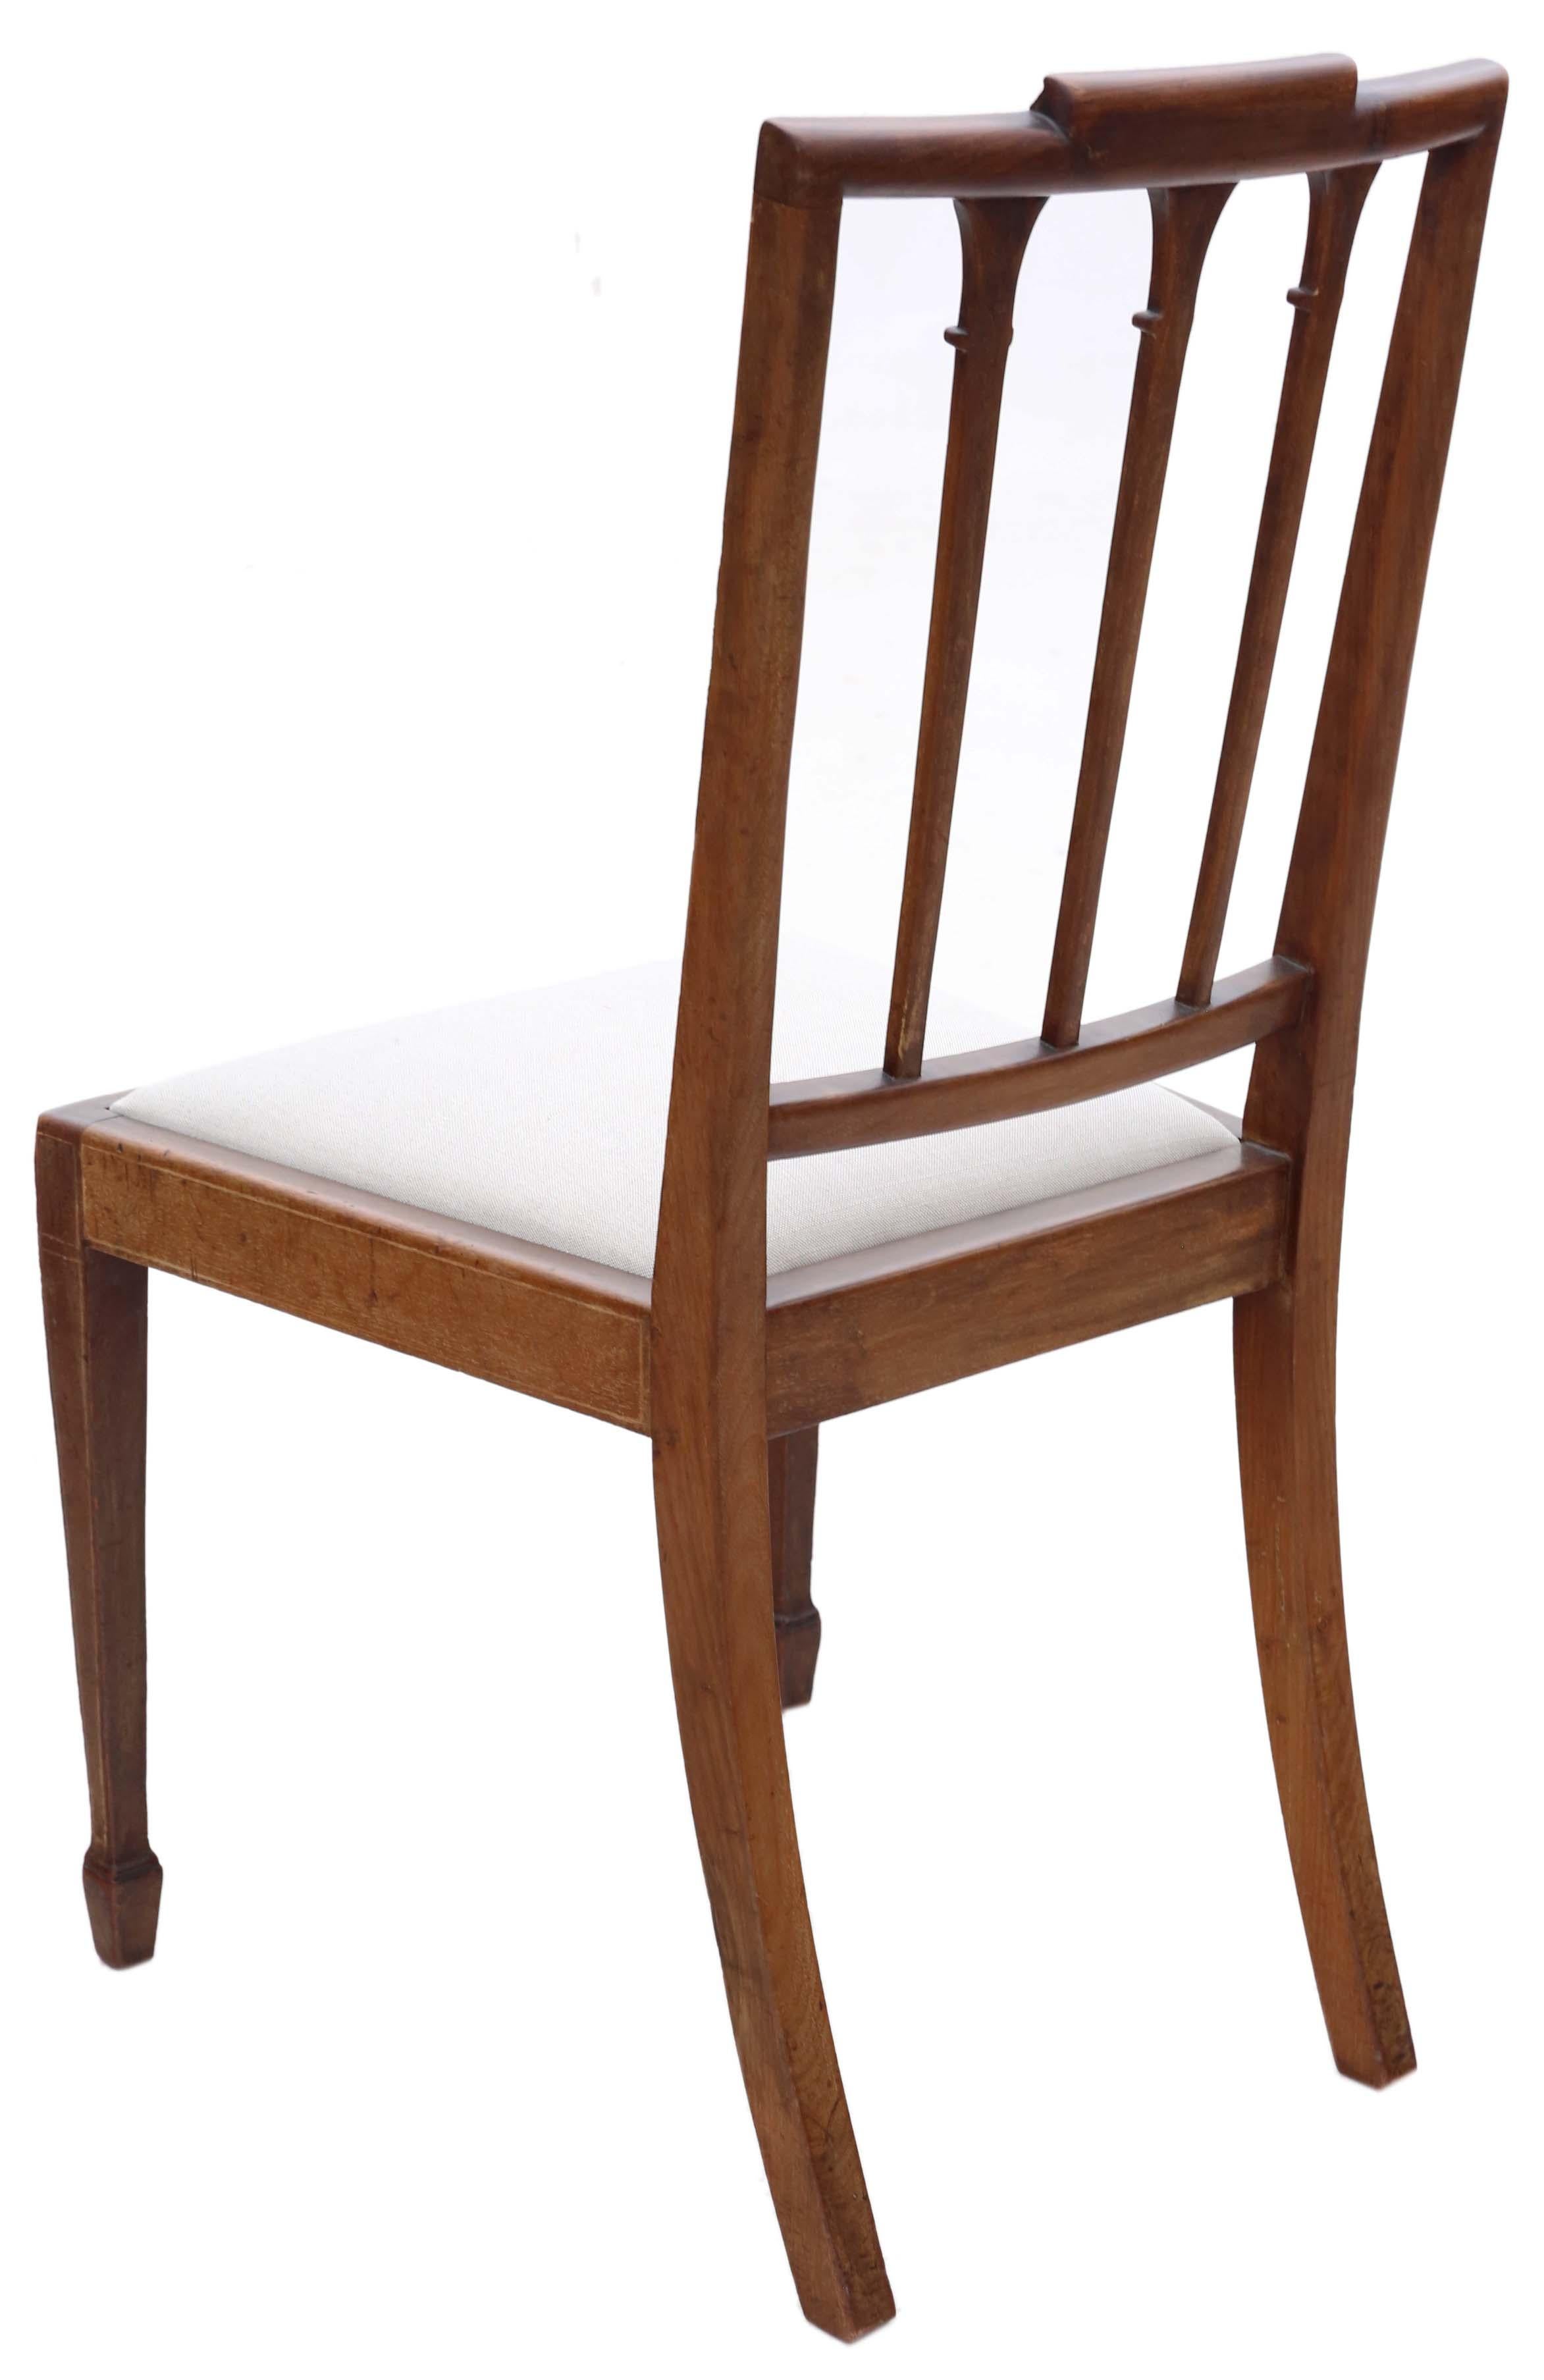 Georgian Revival Mahogany Dining Chairs: Set of 8 (6 + 2), Antique Quality, C190 For Sale 5